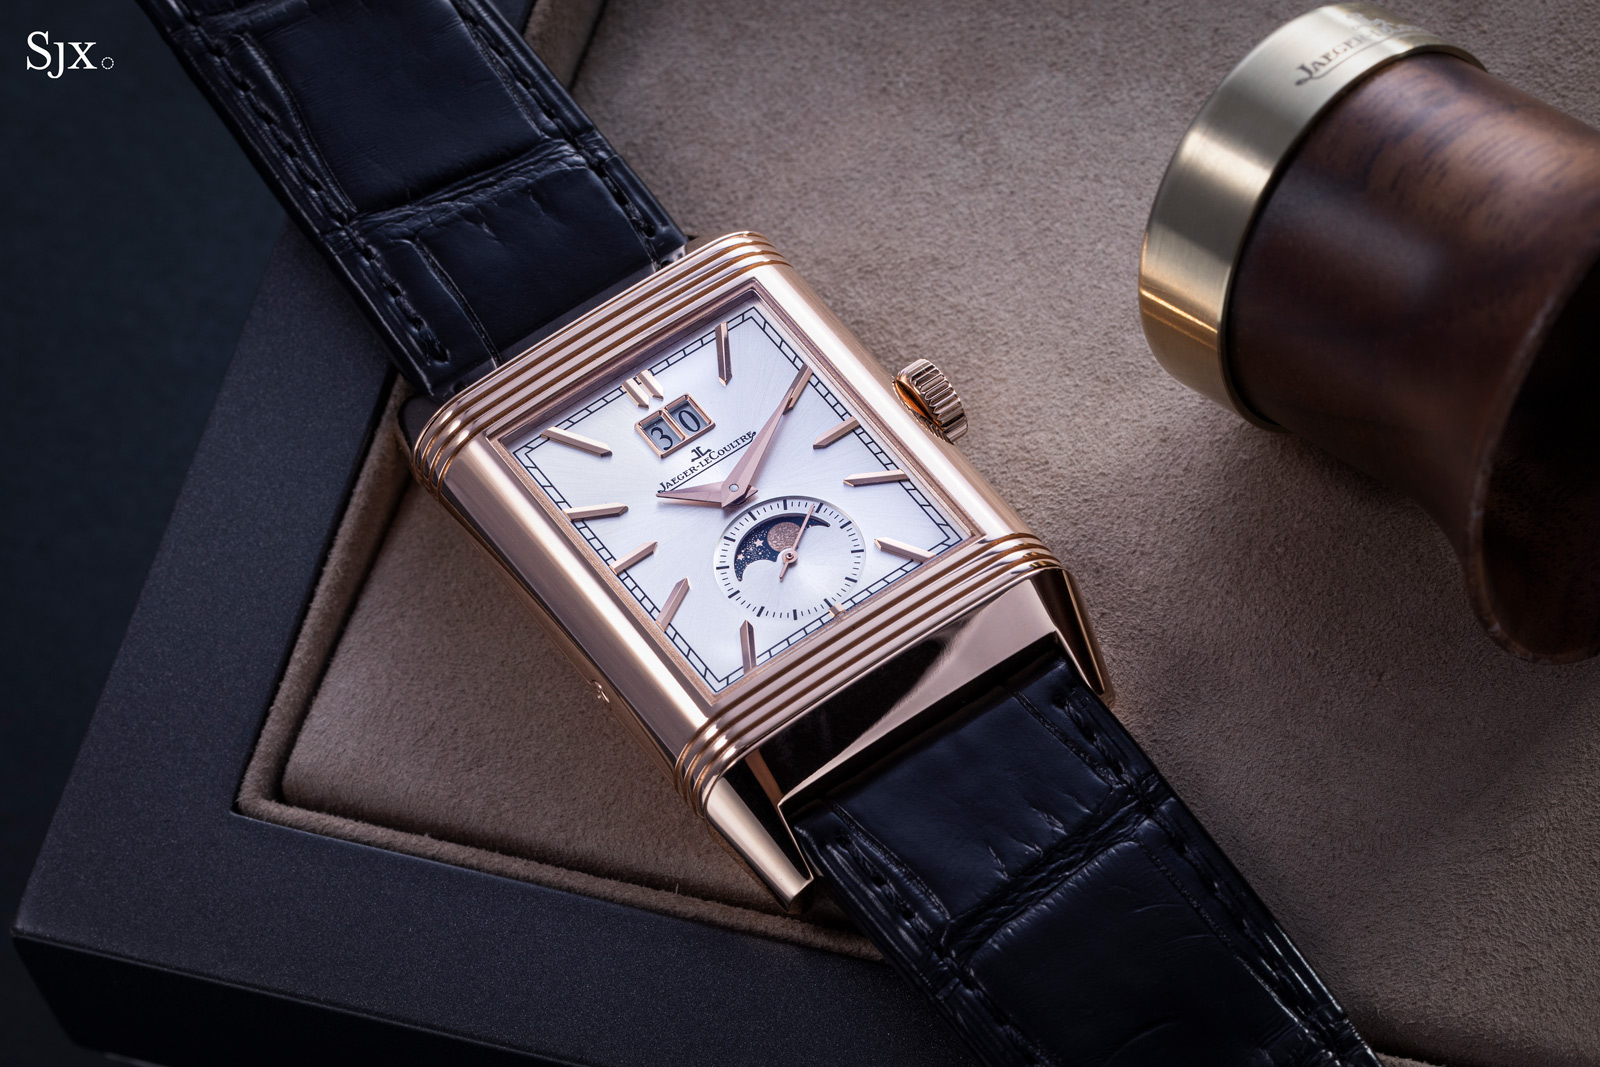 Exhibition: Jaeger-LeCoultre “Reverso Stories” in Singapore | SJX Watches